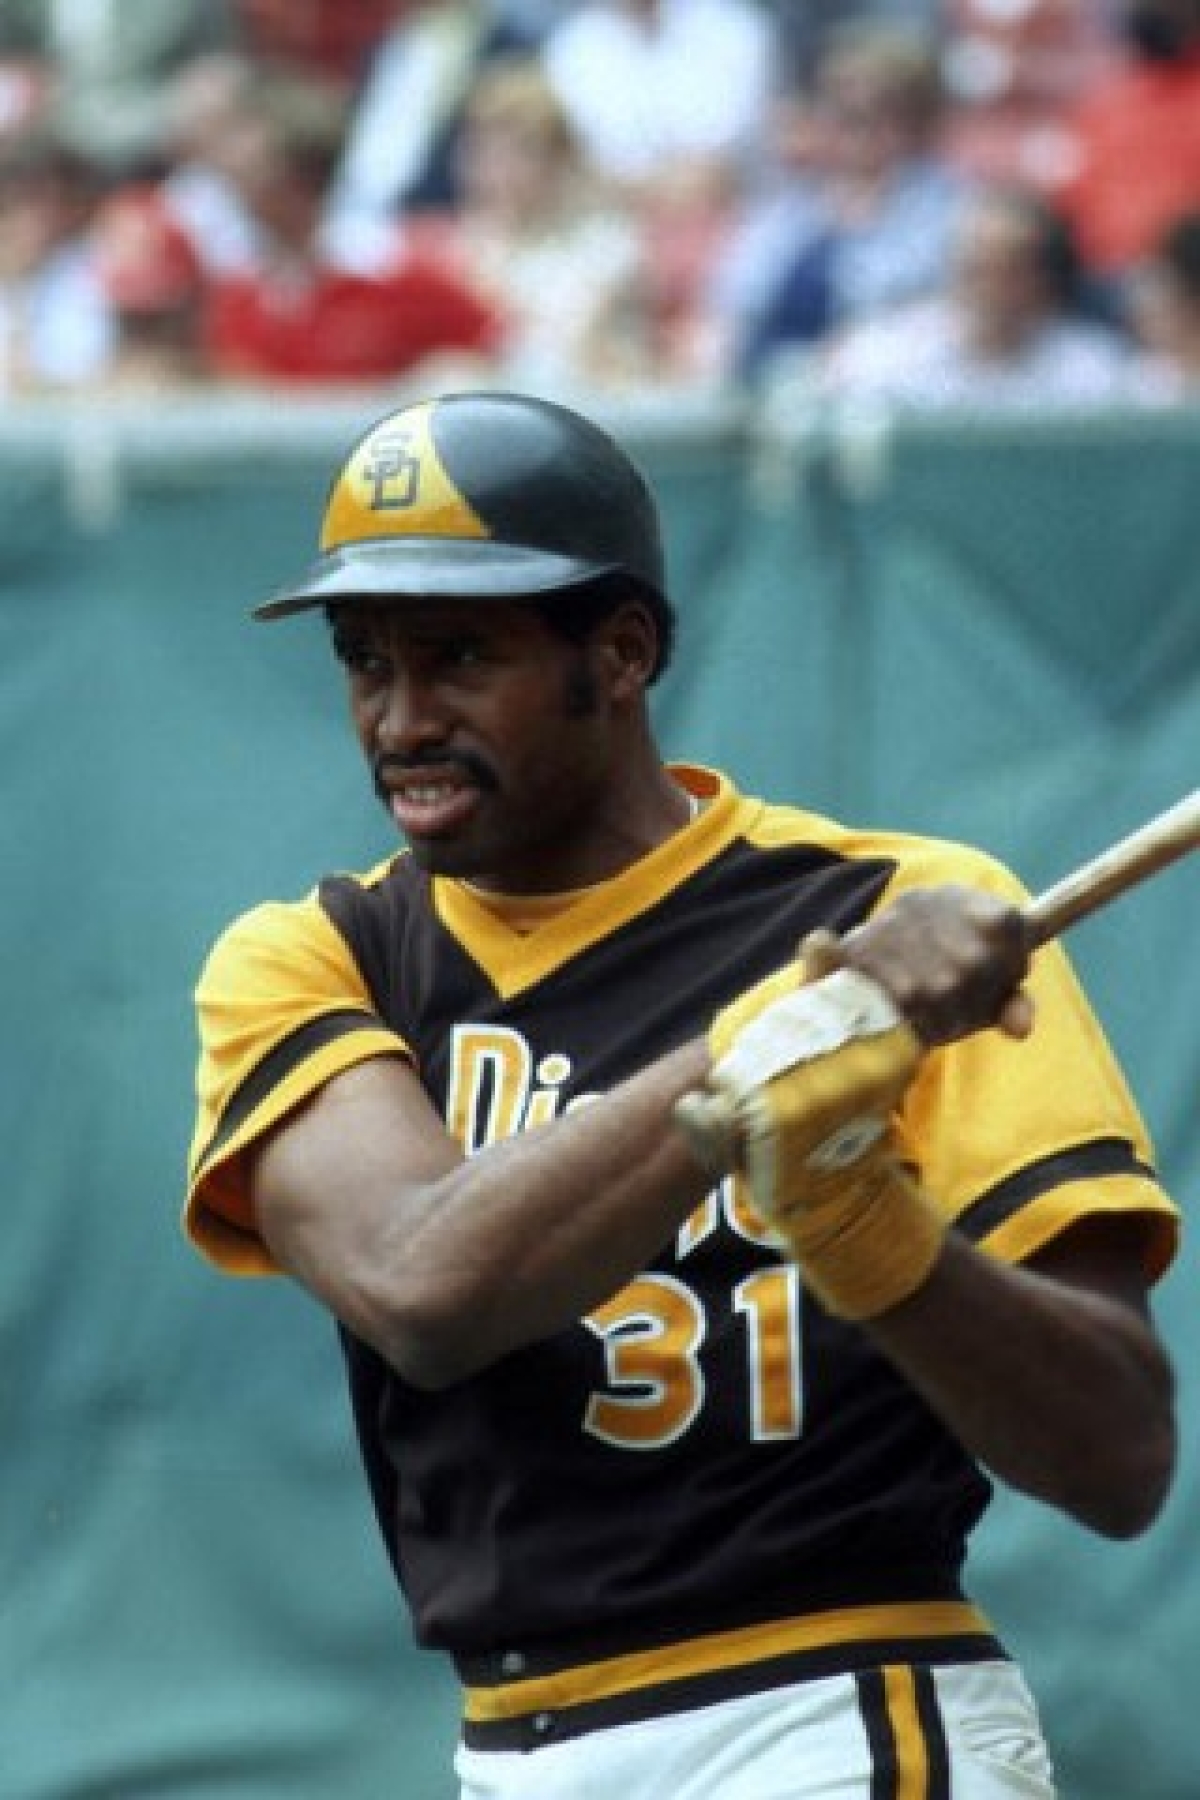 Not in Hall of Fame - 4. Dave Winfield